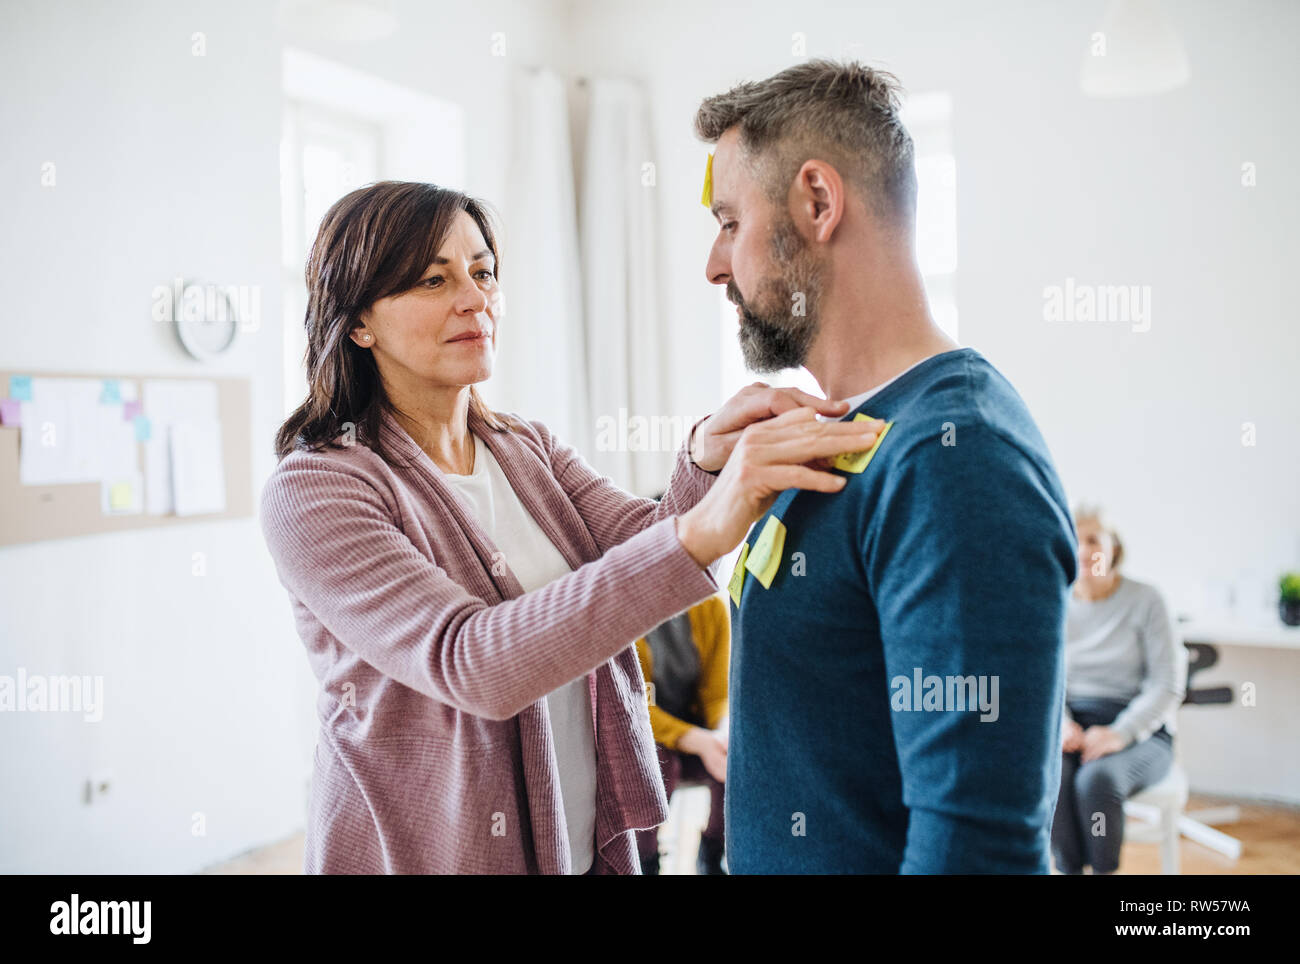 Counsellor putting an adhesive notes on client during group therapy. Stock Photo